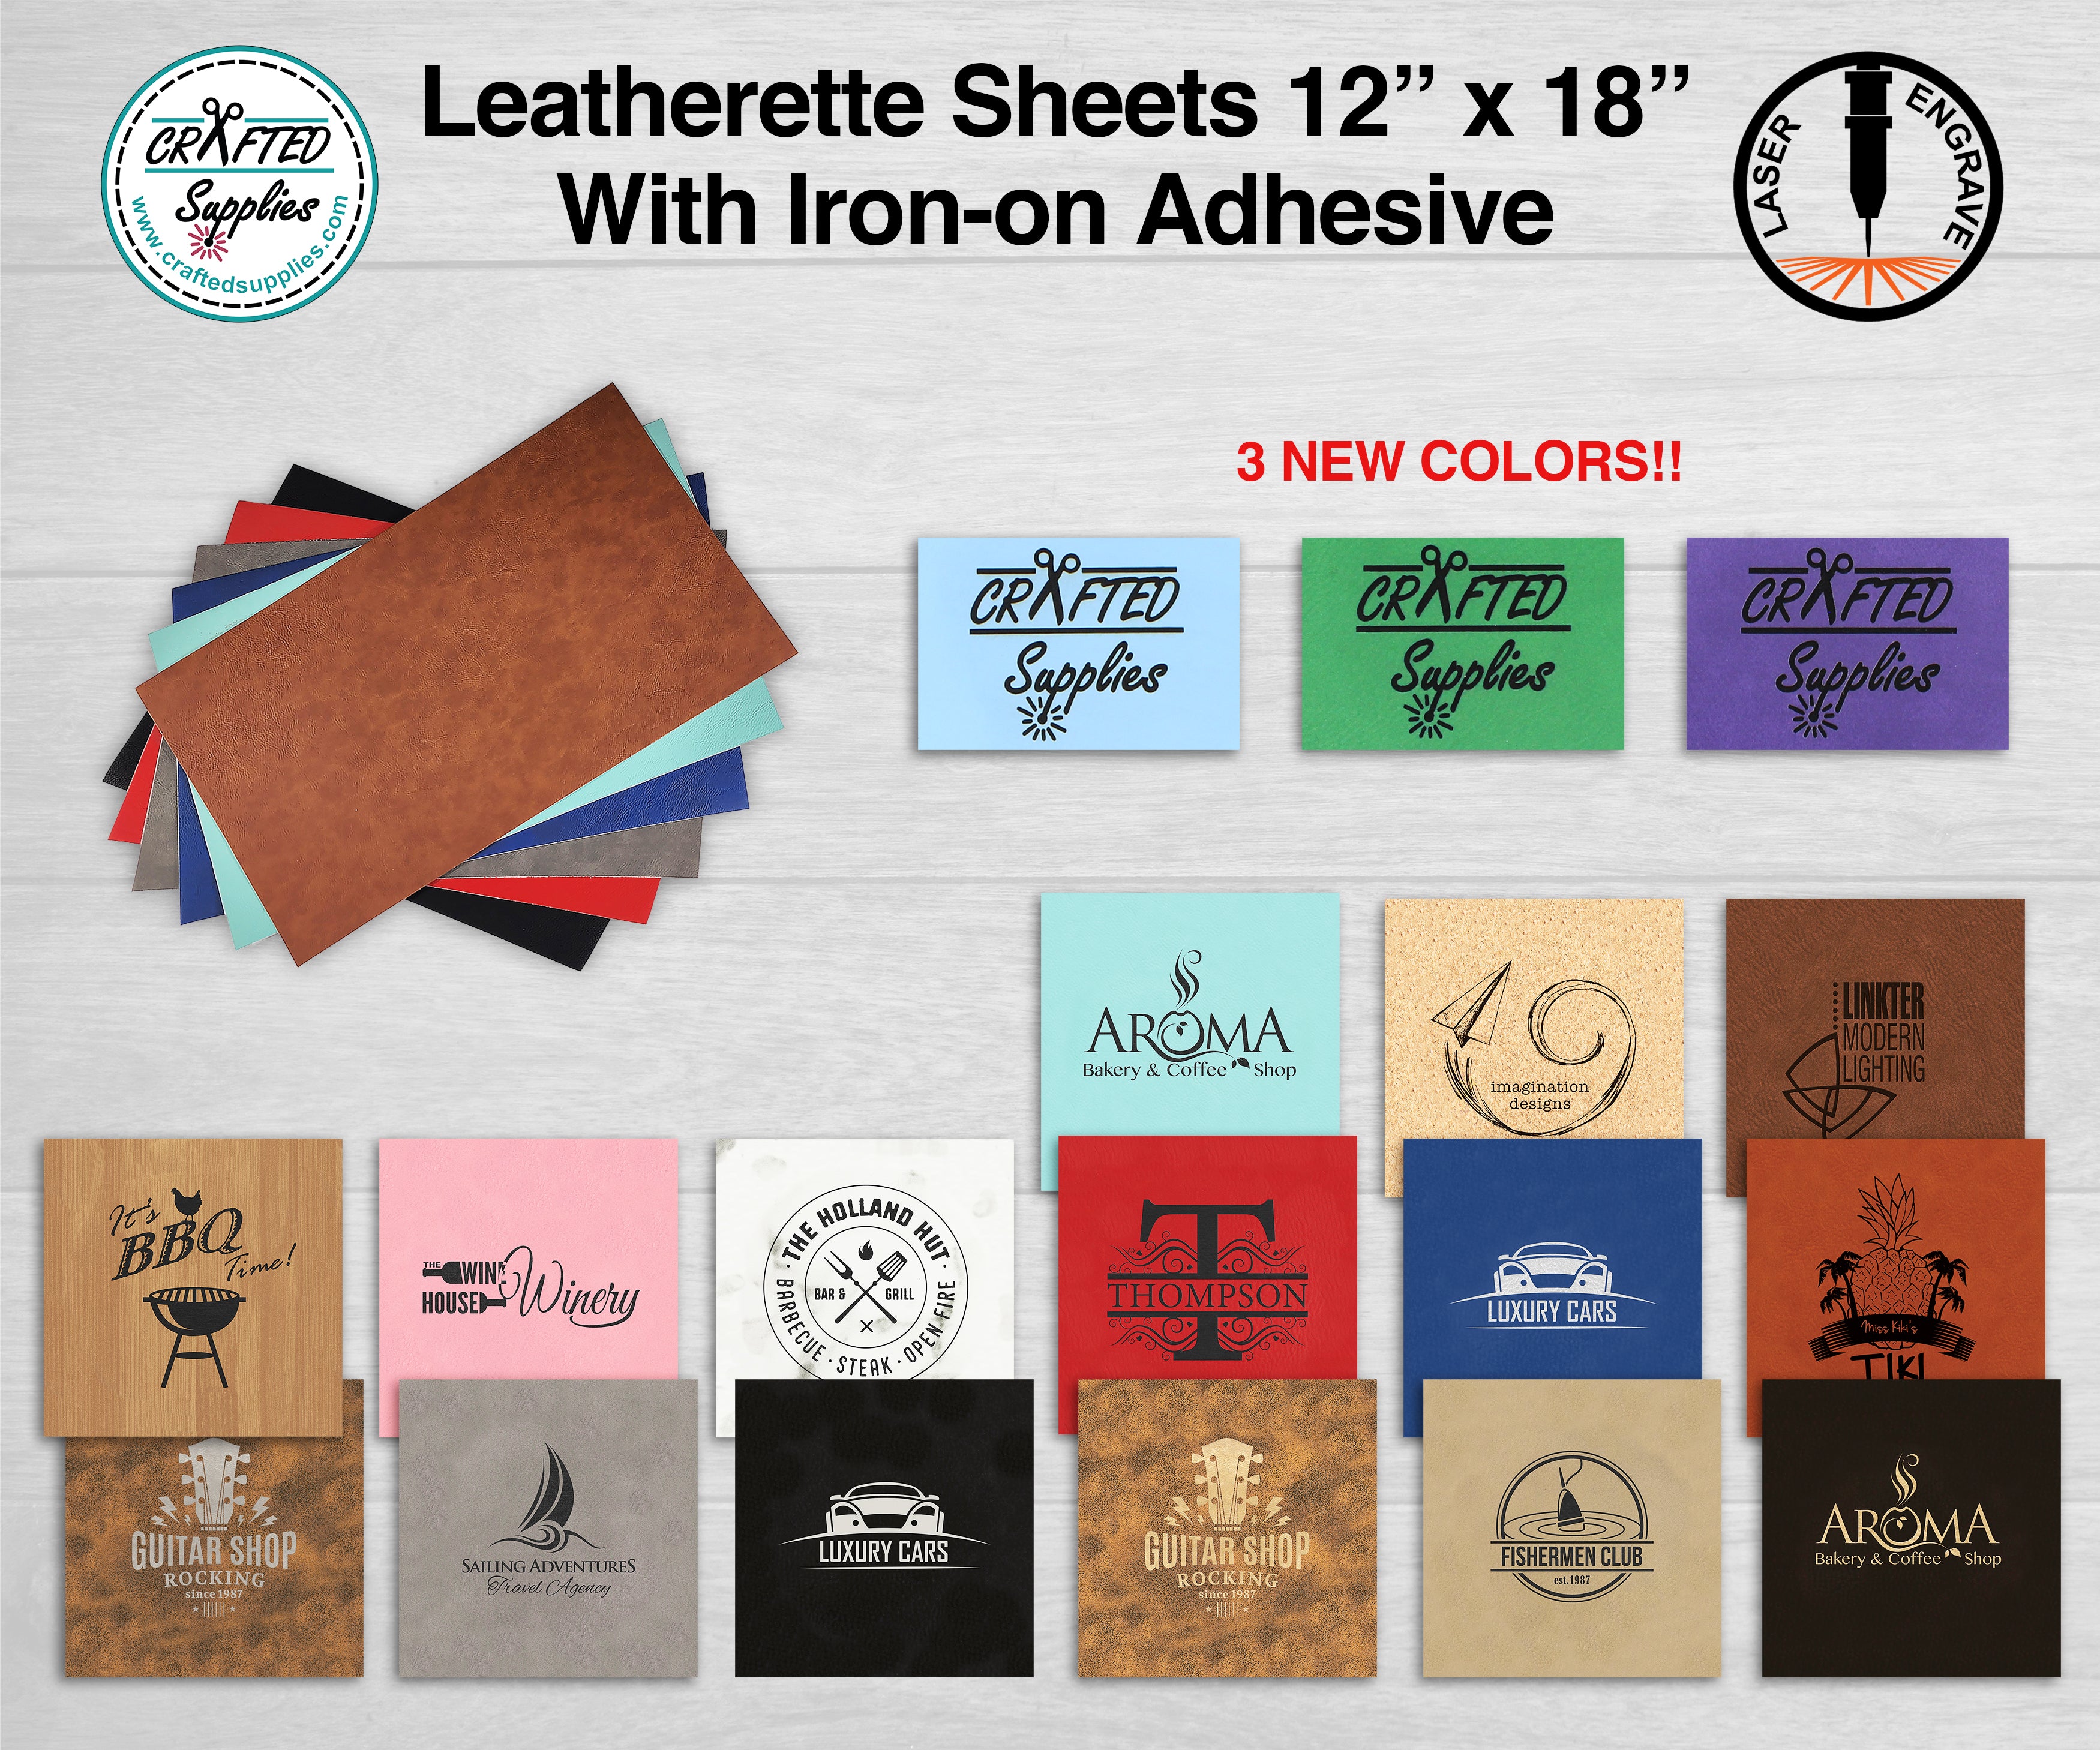 Leatherette Sheet With Iron-on Adhesive 12 in x 18 in